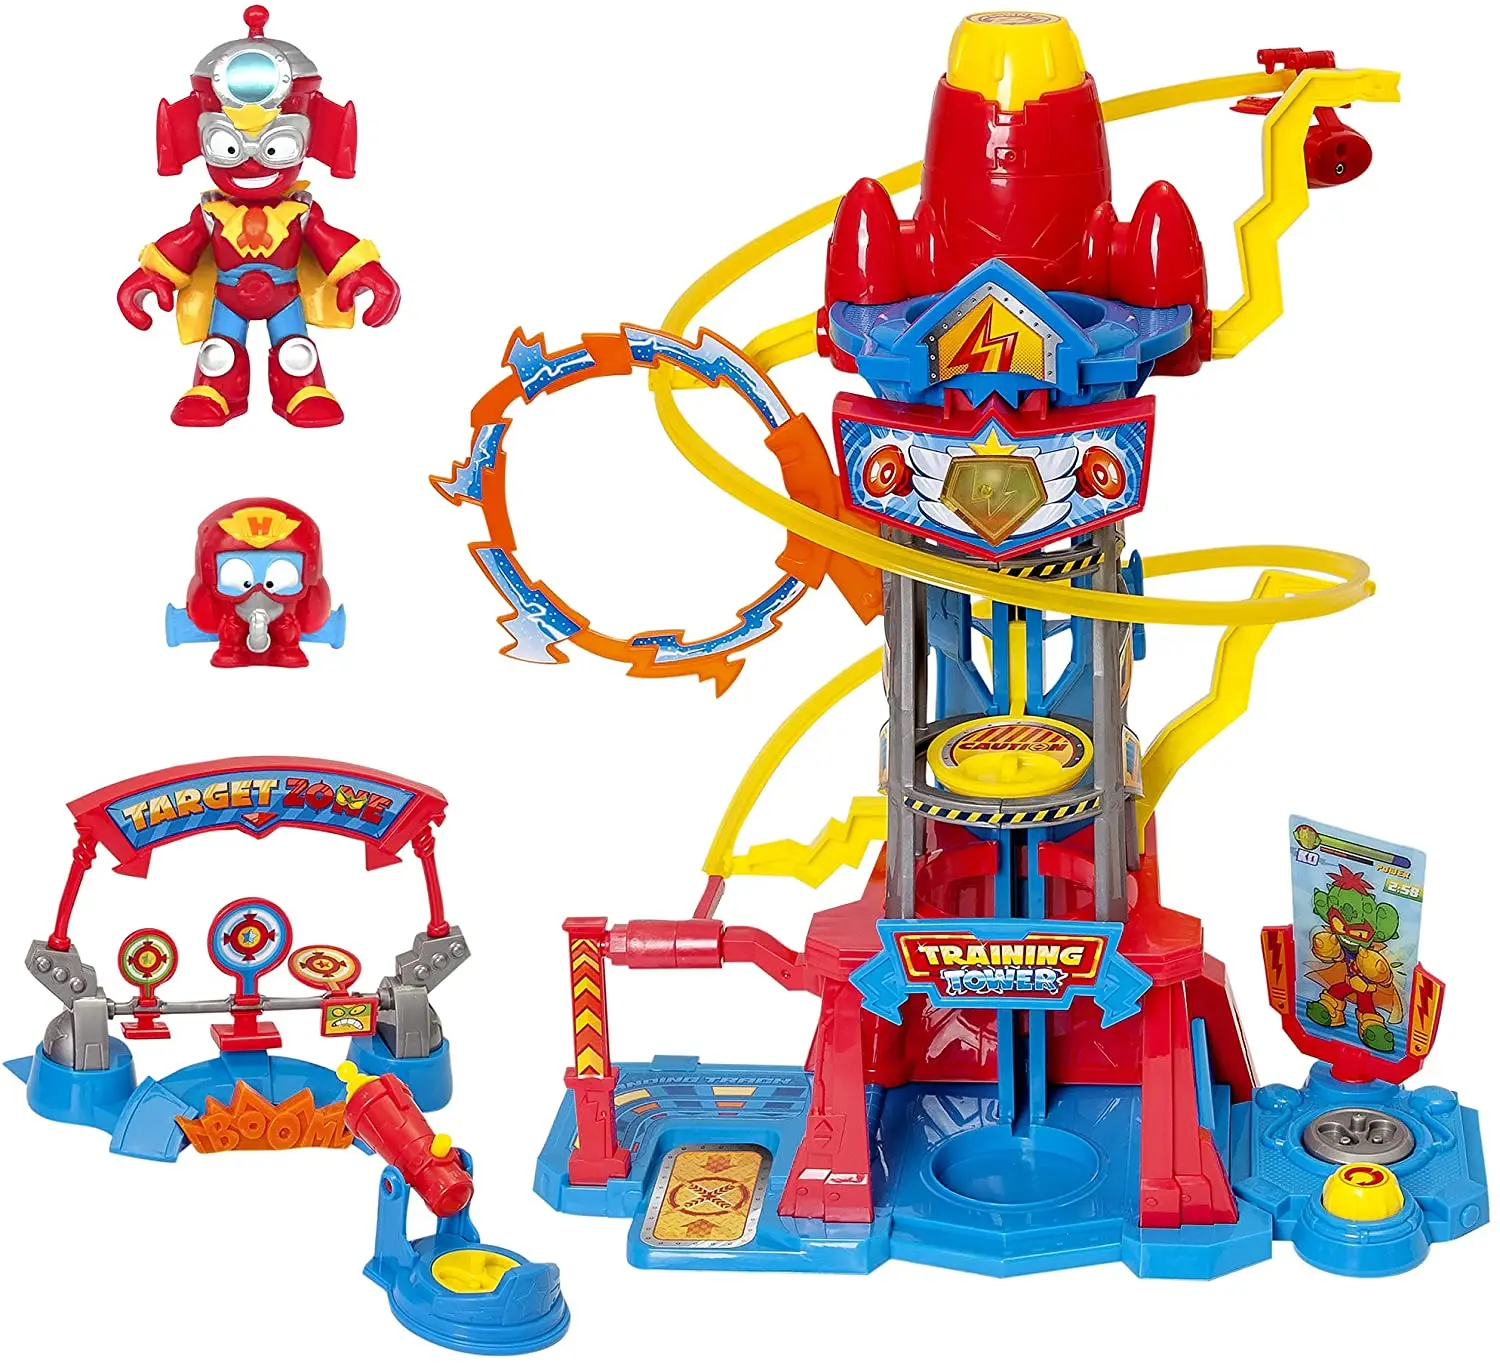 3 training areas for learning to fly shoot and fight. SUPERTHINGS Training Tower – Training tower with lights and sound 1 SuperThing and 1 exclusive Kazoom Kid 